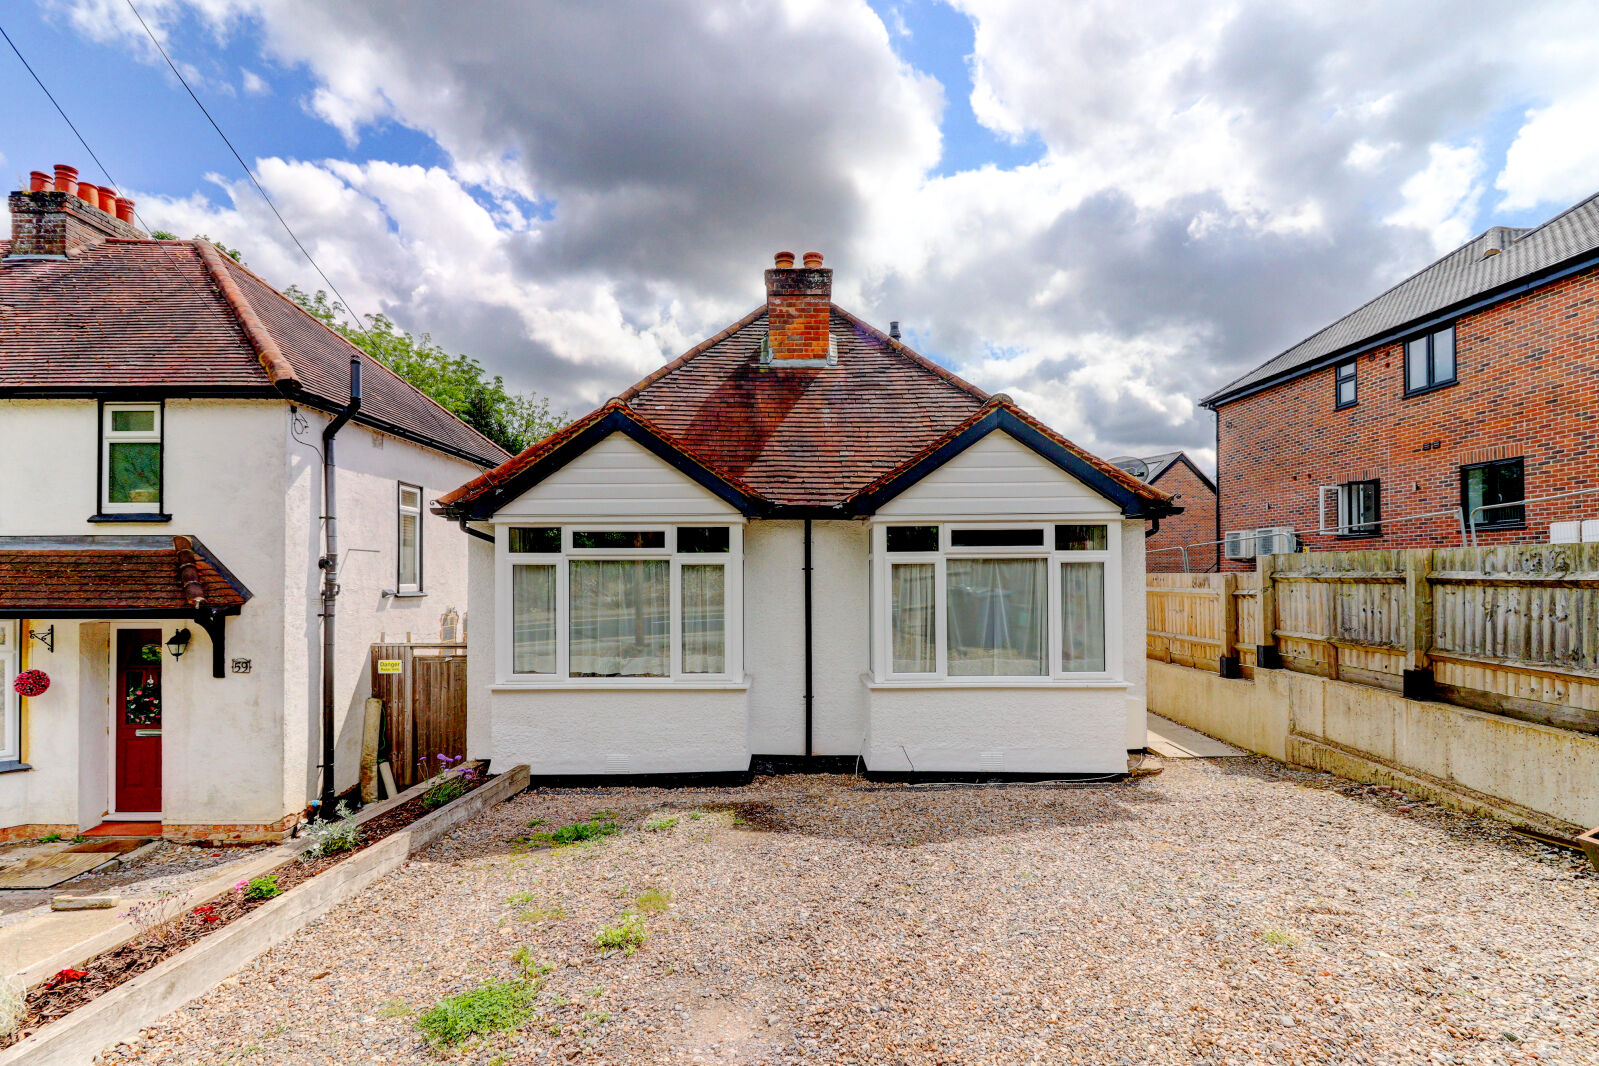 3 bedroom detached house for sale Chapel Lane, High Wycombe, HP12, main image